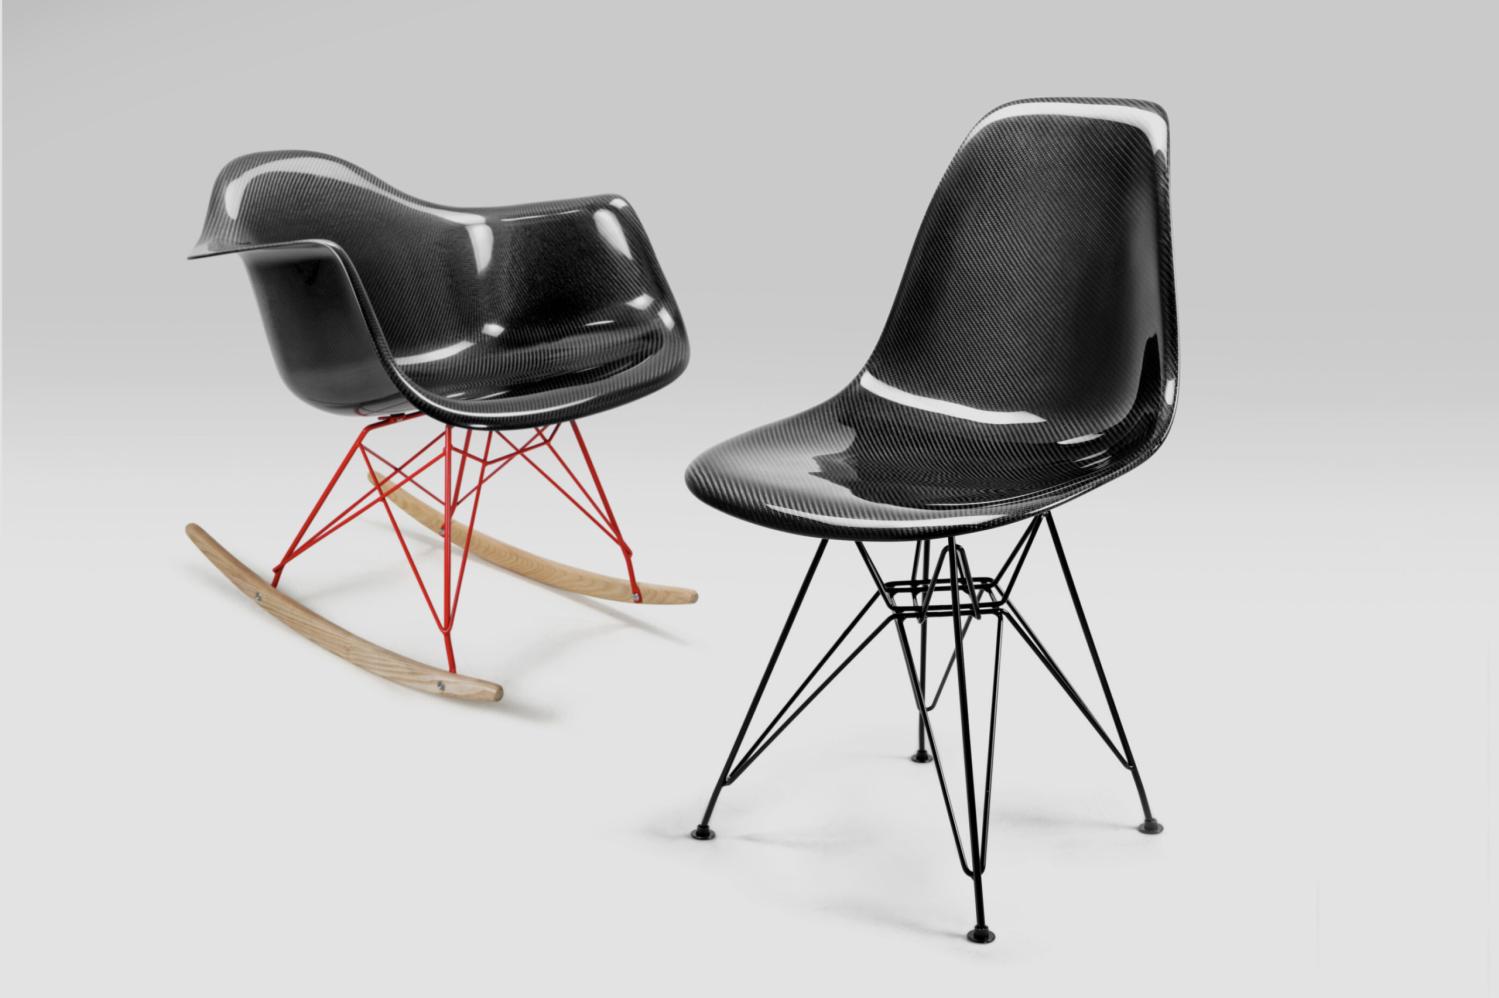 New Products: Carbon Fiber Shell Chairs by Seibon Carbon